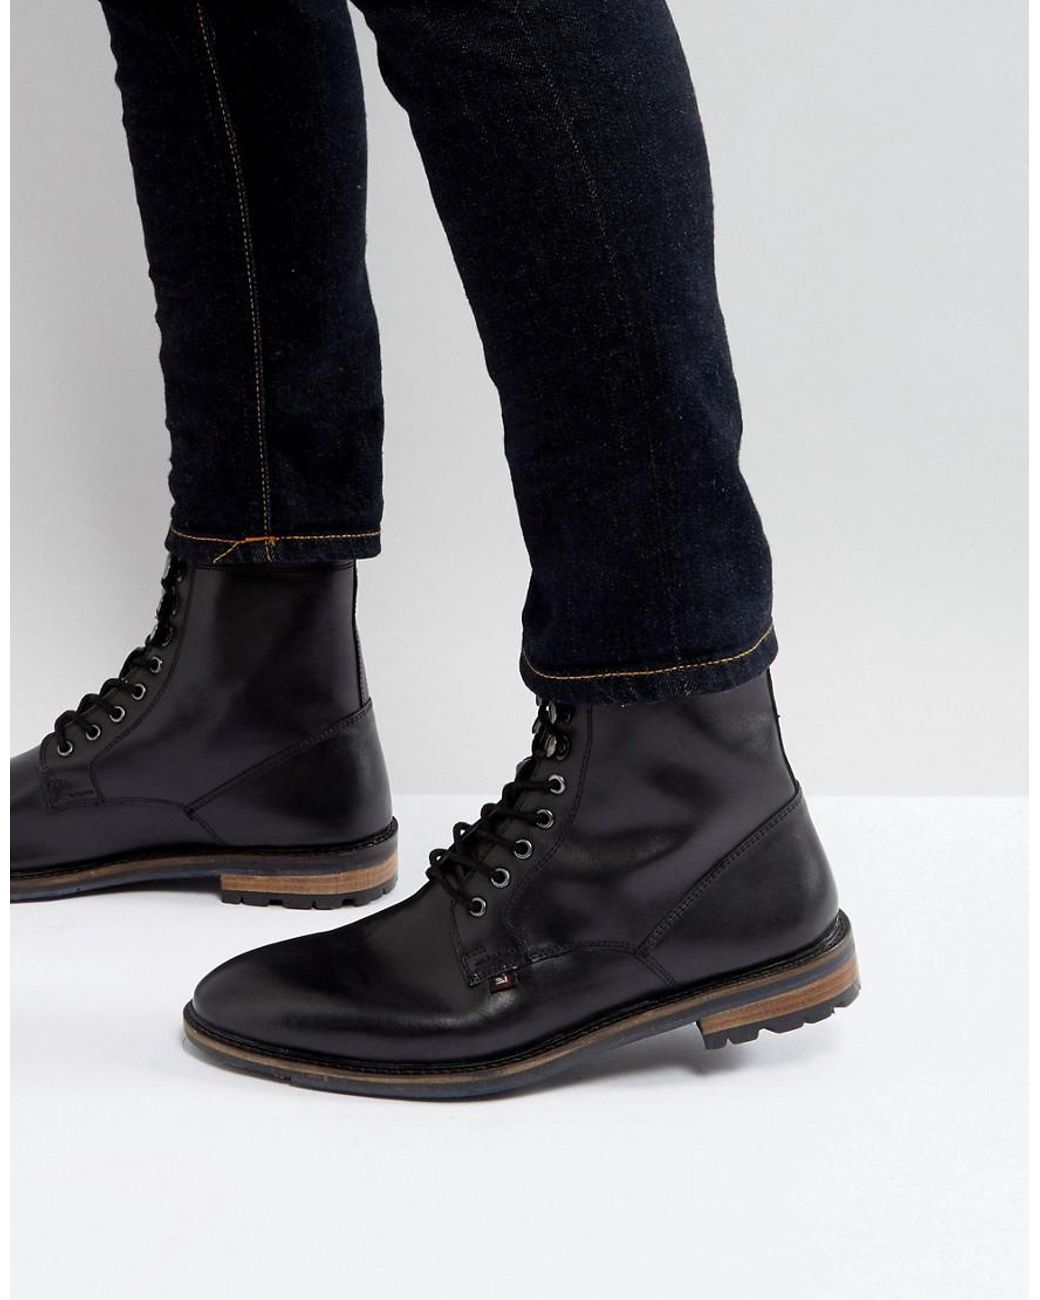 Ben Sherman Military Lace Up Boots In Black Leather for Men | Lyst